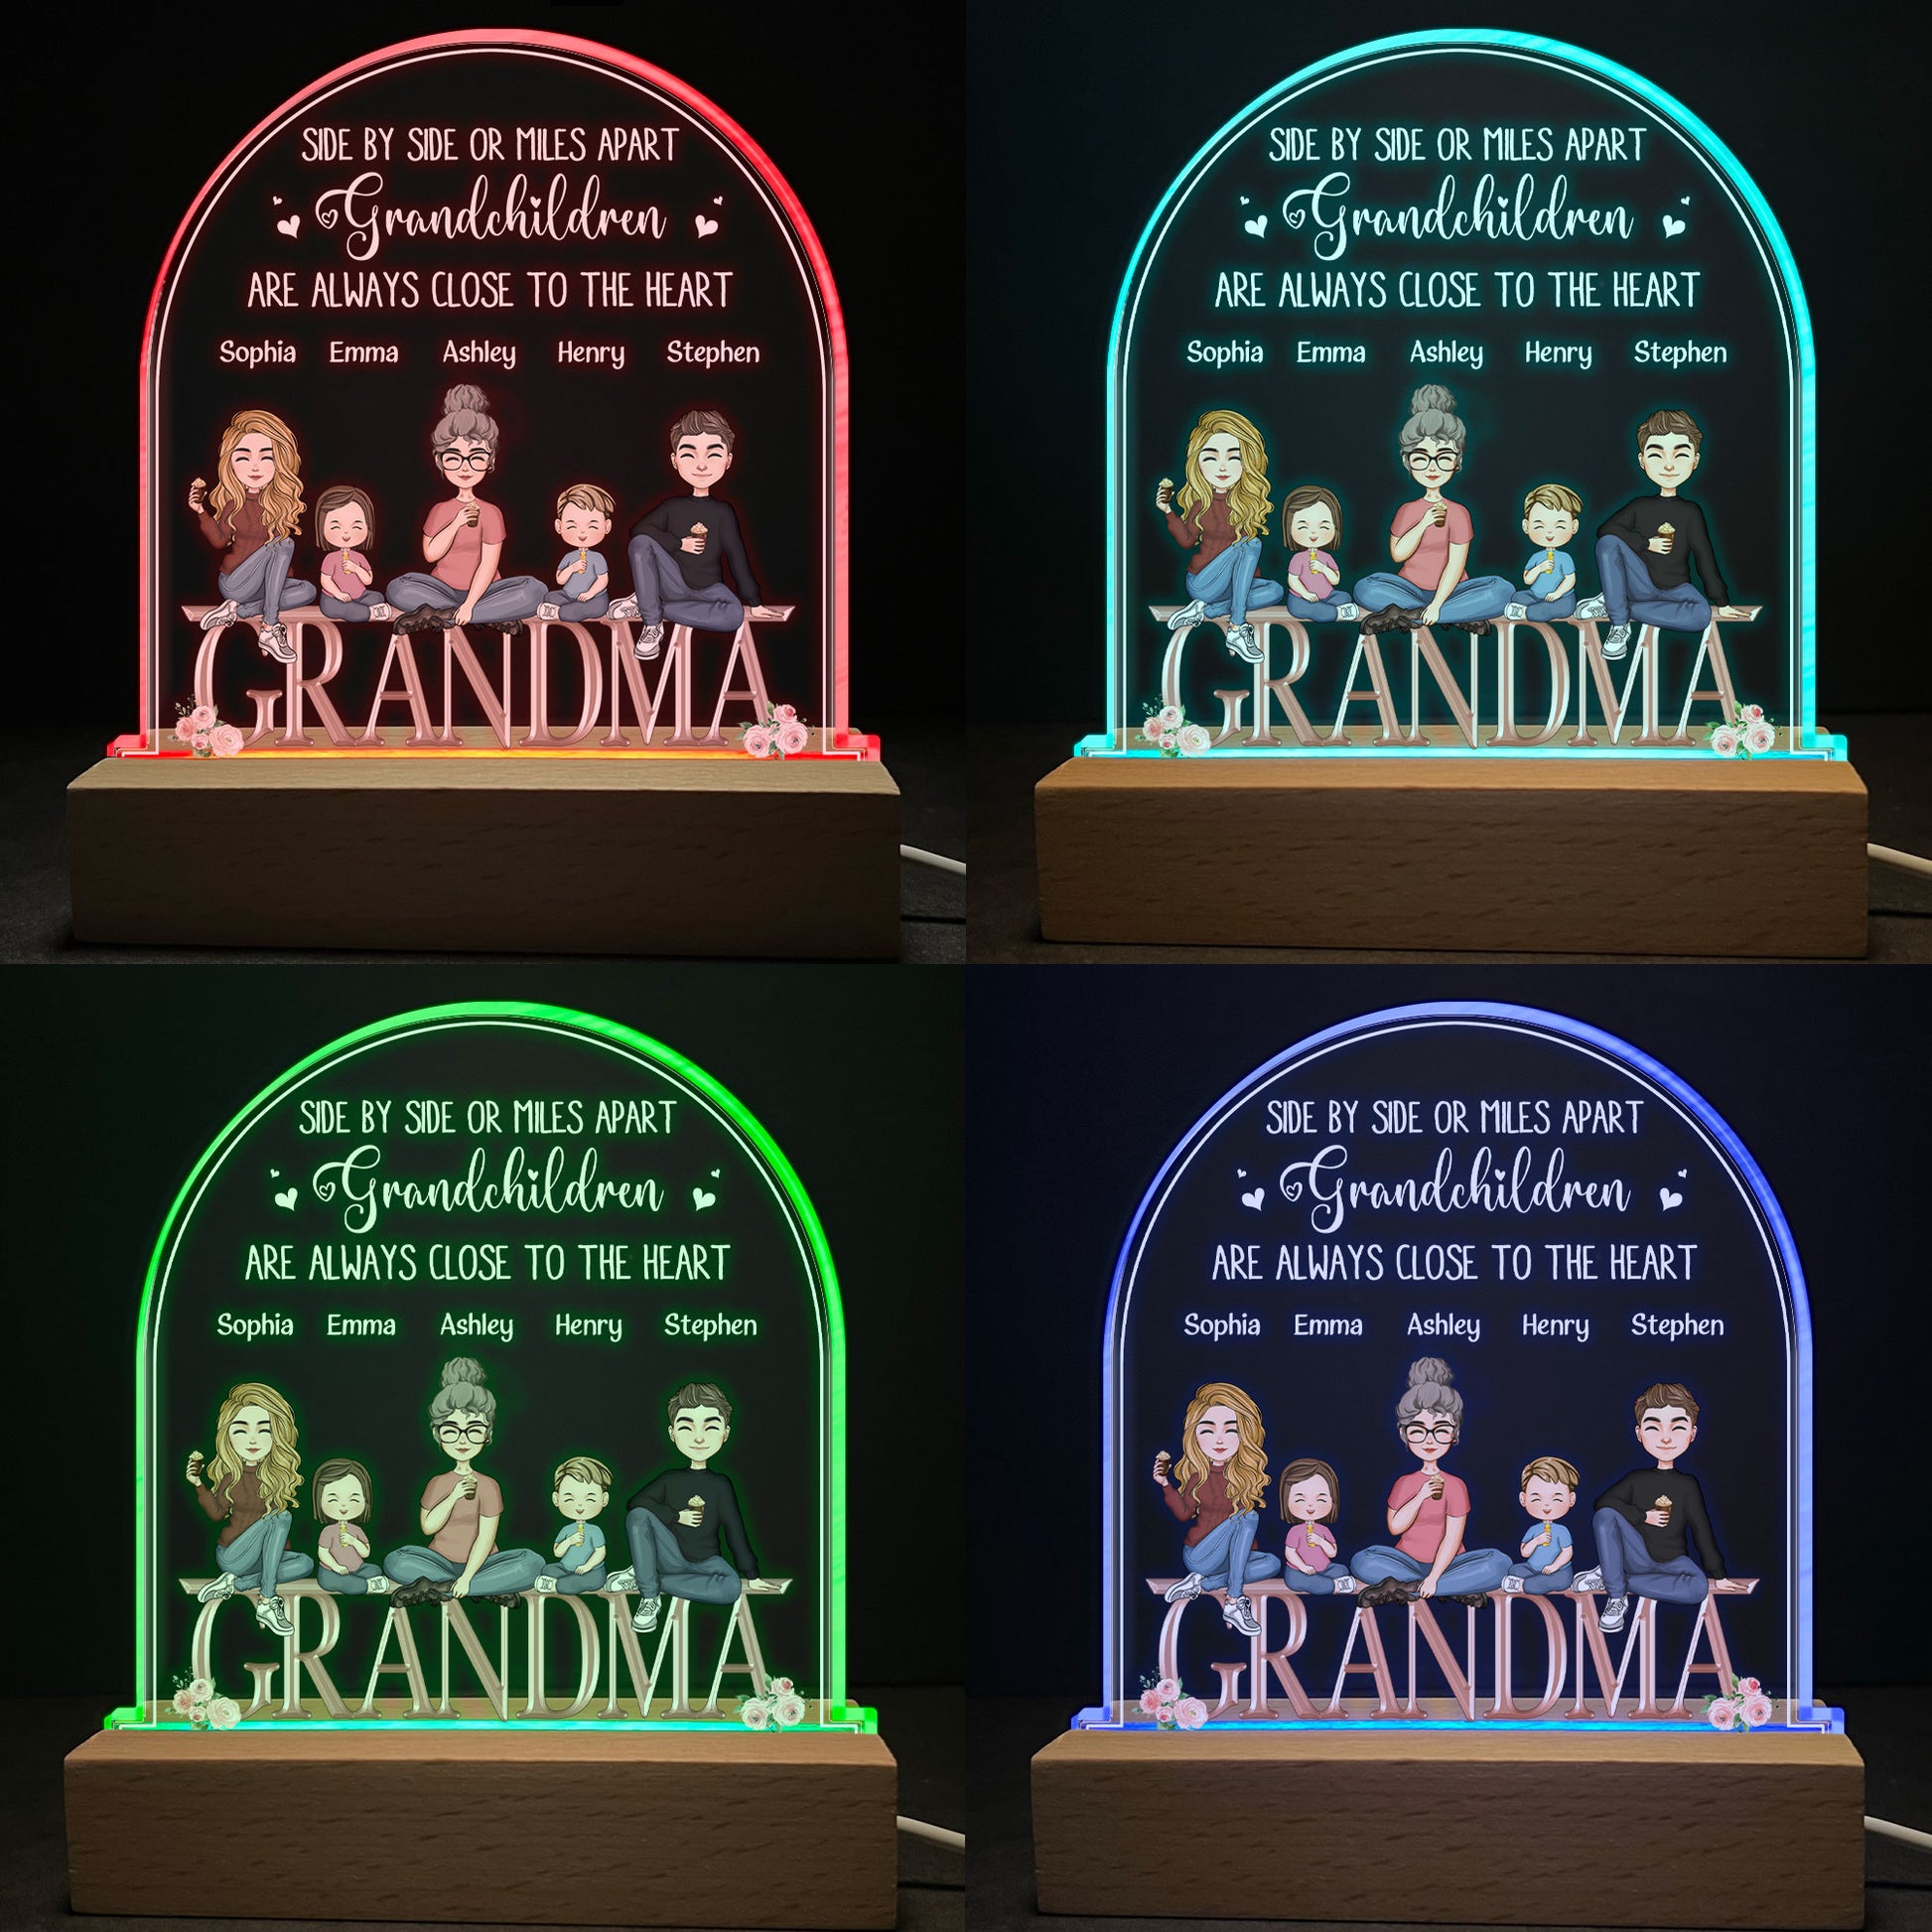 Grandkids Are Always Close To The Heart - Personalized 3D Led Light Wooden Base - Mother's Day, Birthday, Loving Gift For Grandma, Nana, Gigi